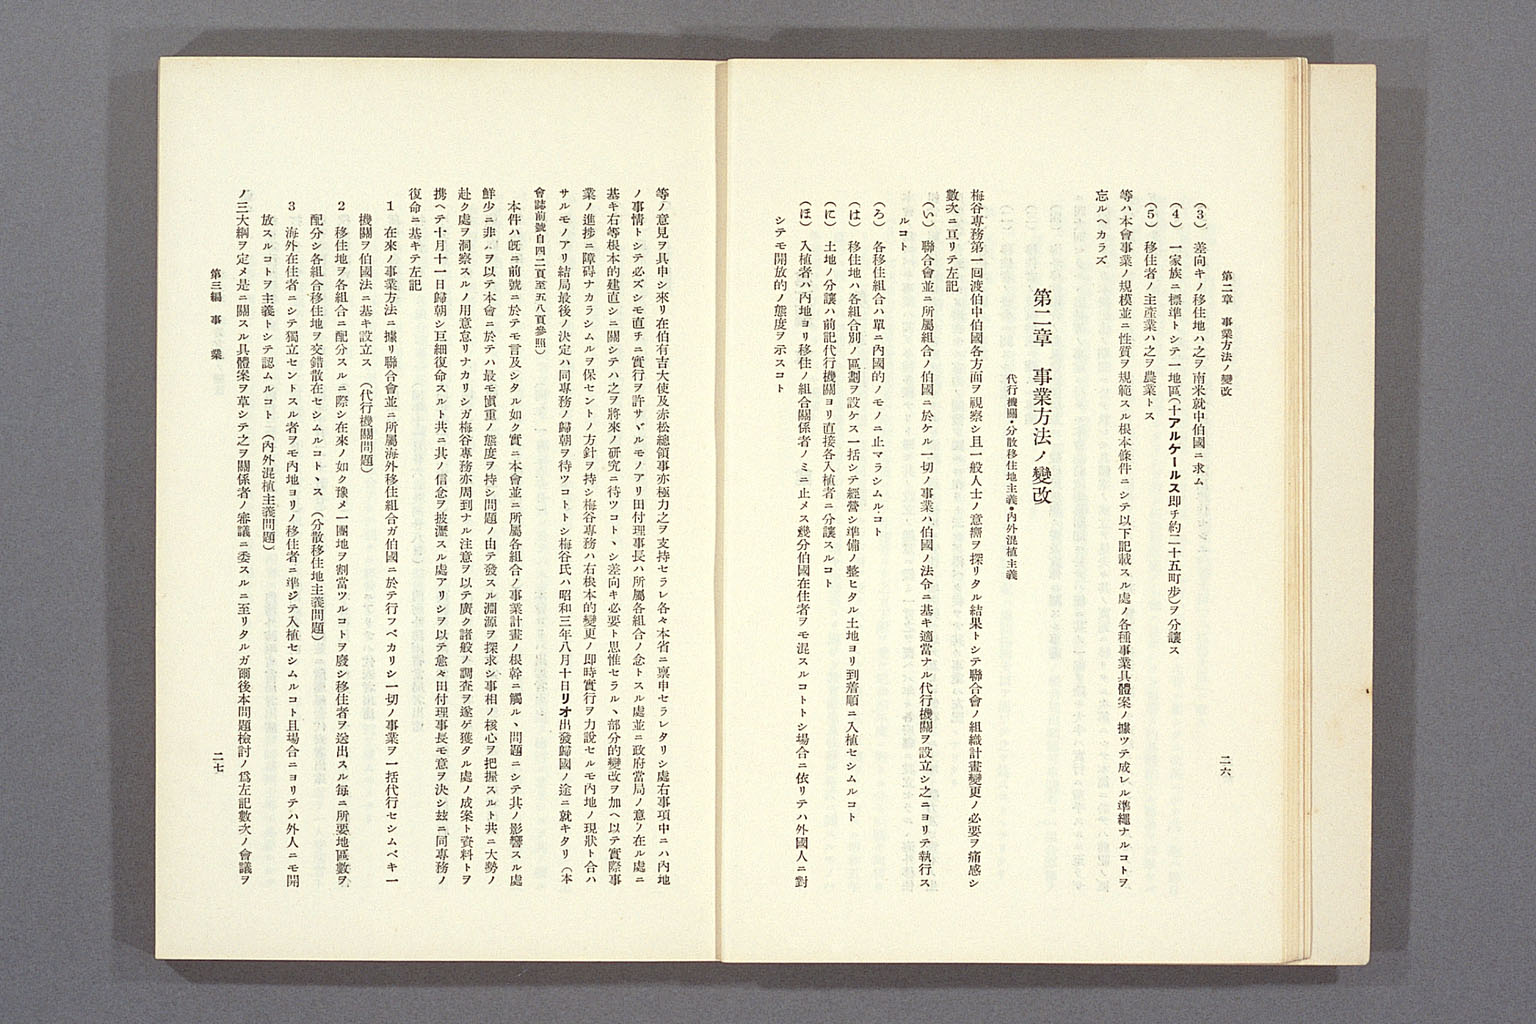 Image “Details of a policy change from the principle of separate management by each prefecture to the principle of mixing Japanese and foreigner migrants”